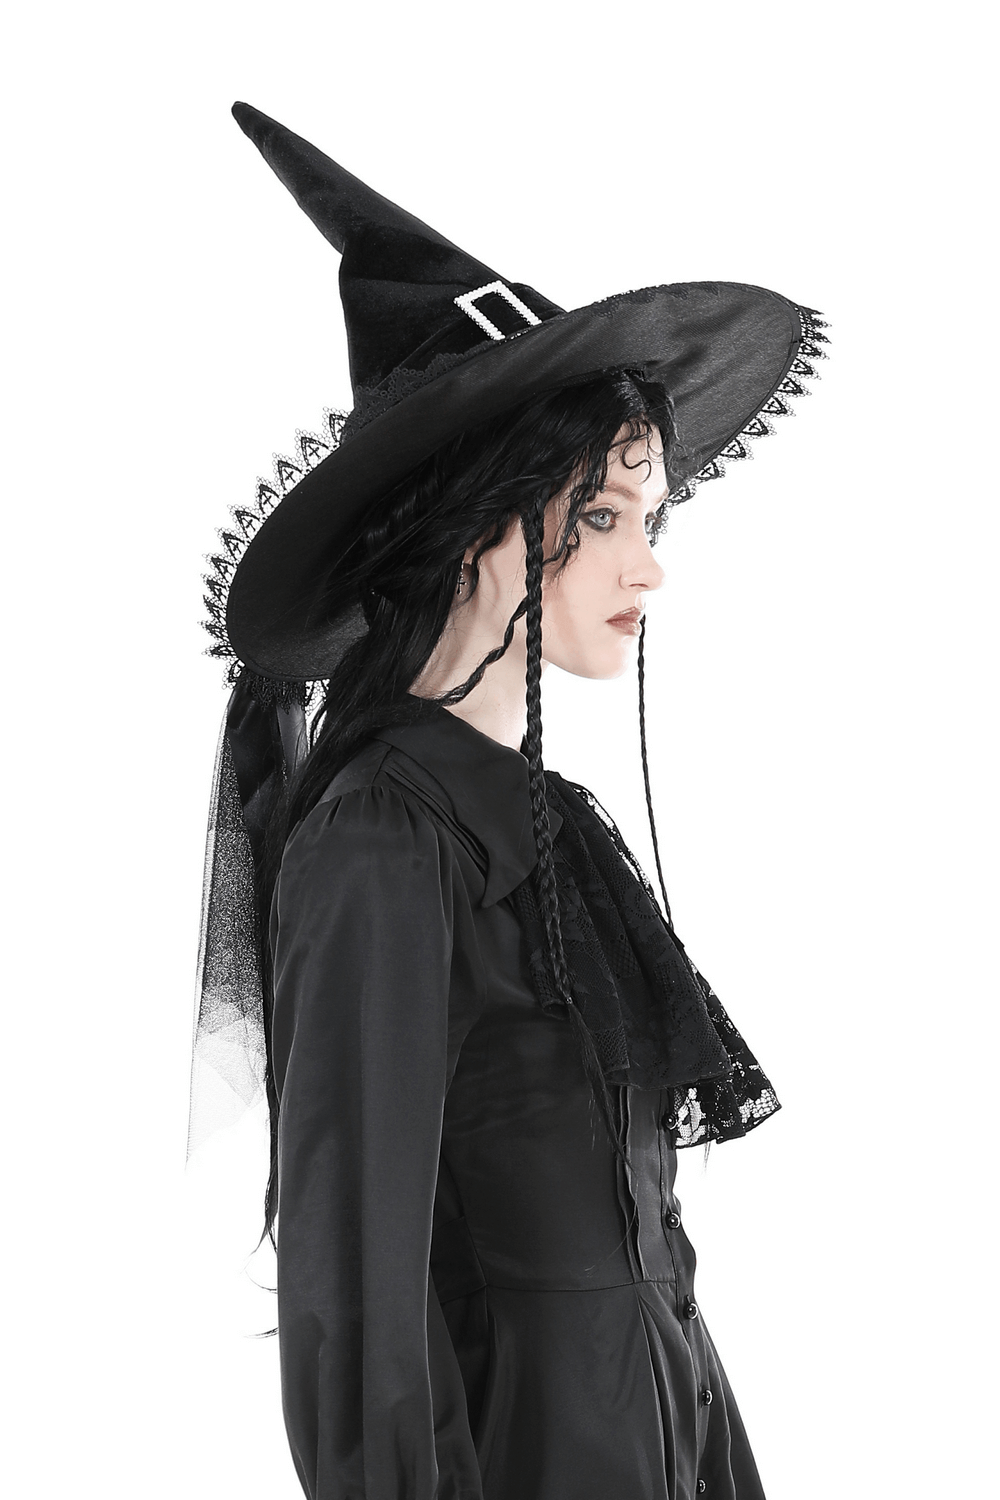 Enchanting Black Witch Hat with Floral Embellishments